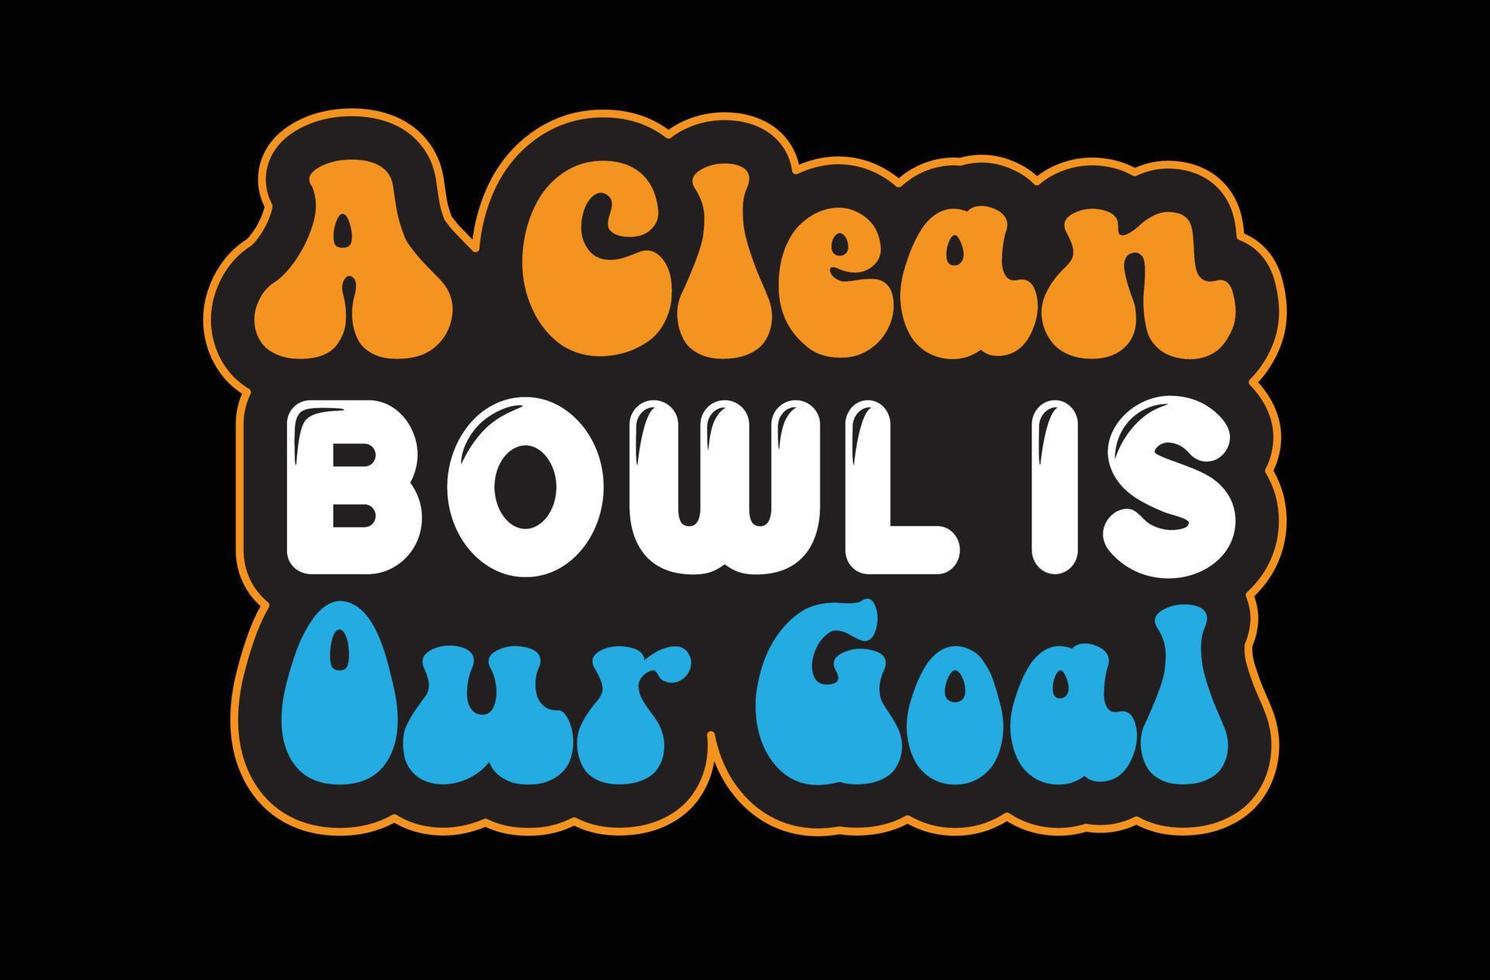 A Clean Bowl is Our Goal svg sticker design vector